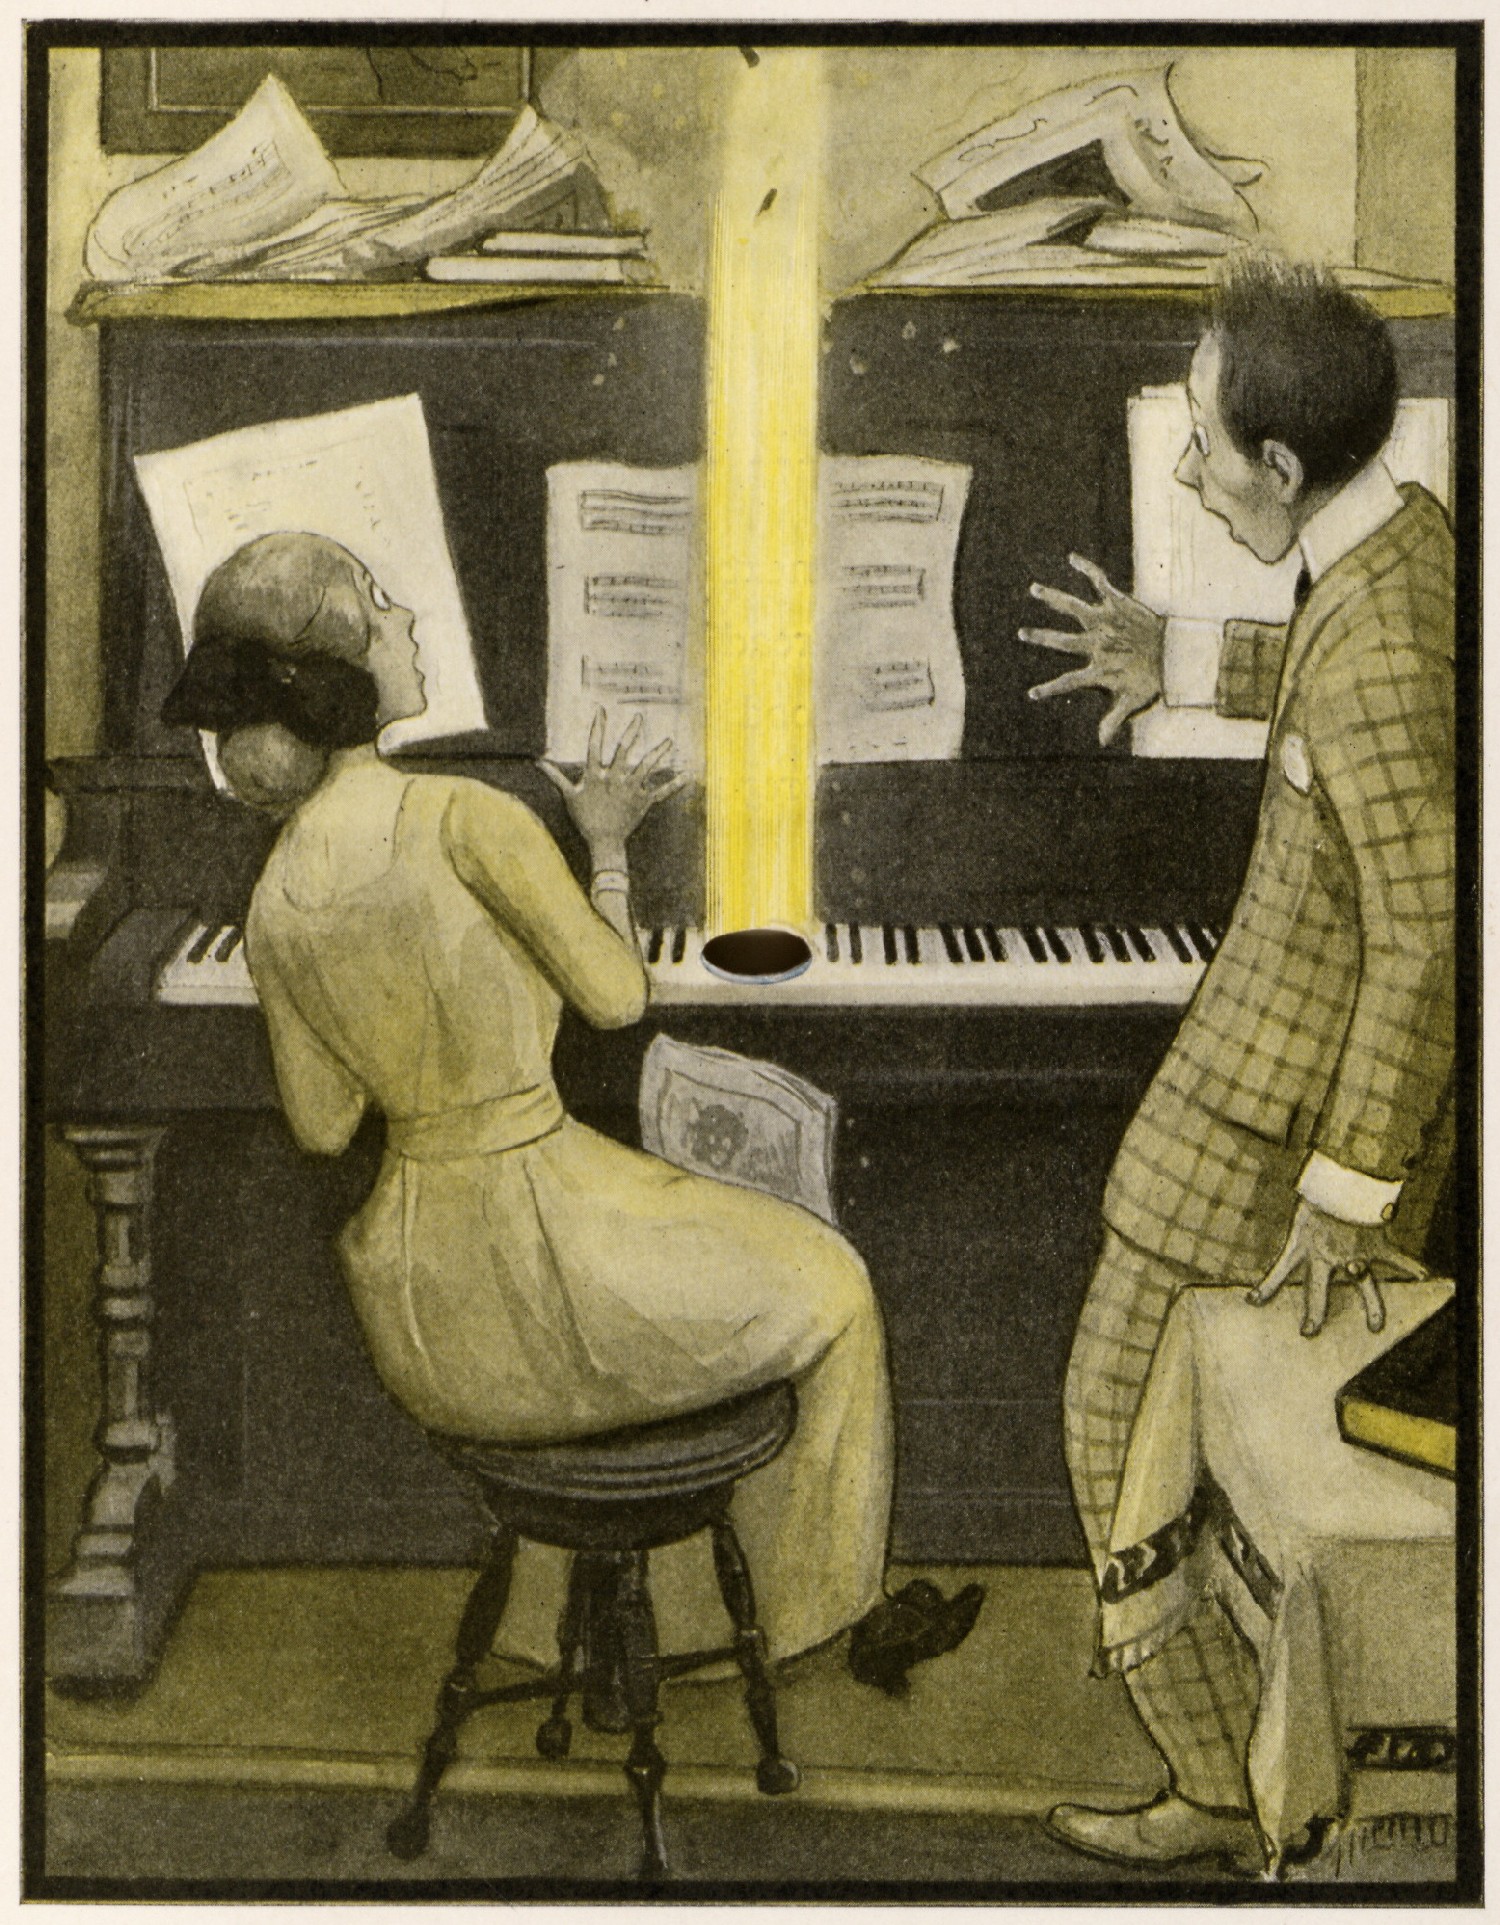 The Rocket Book 1912